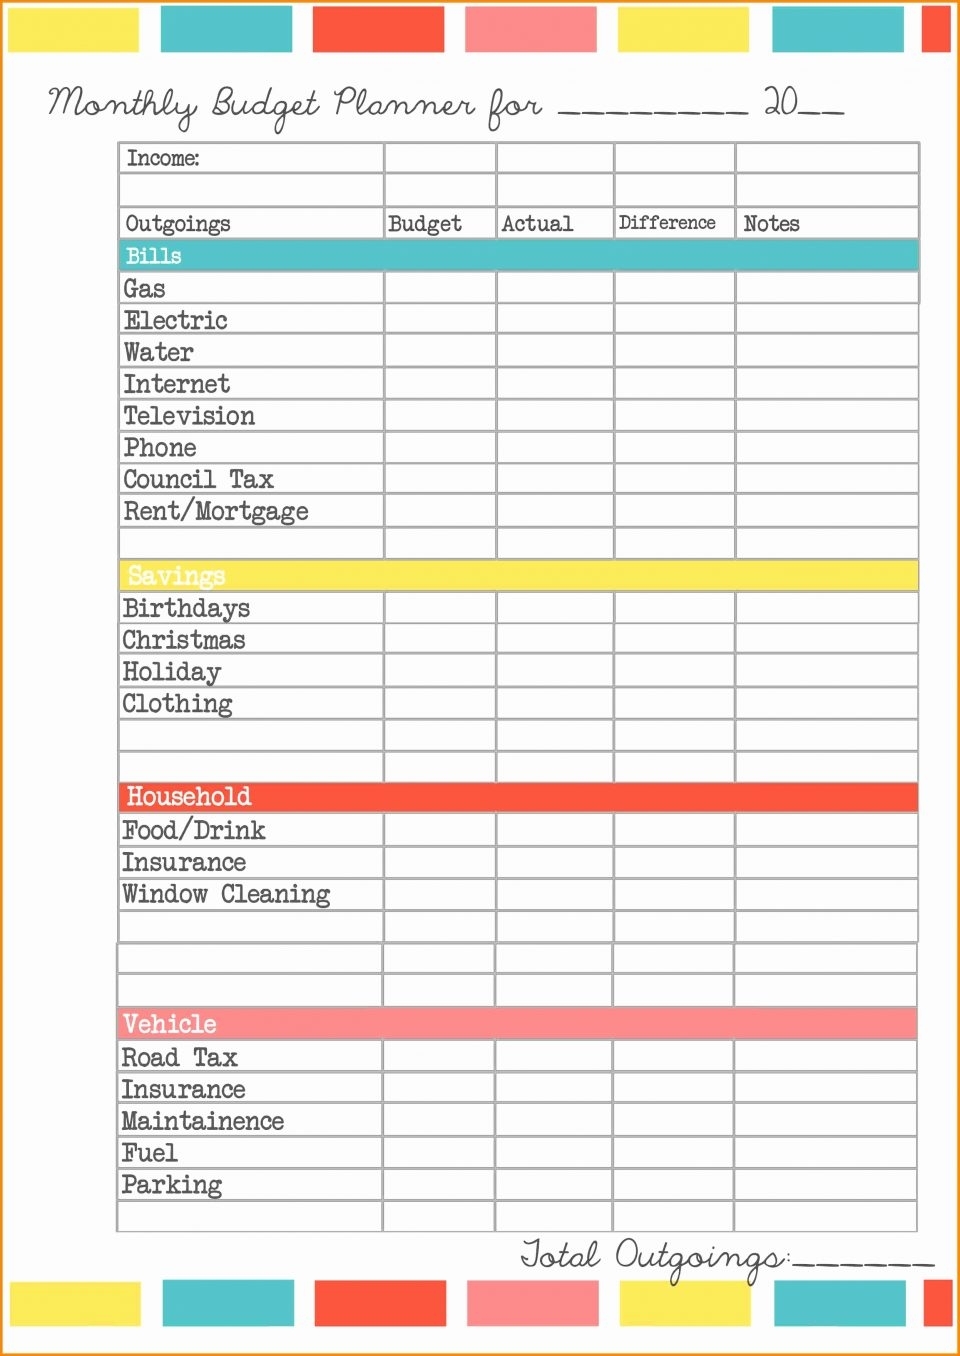 Get Payment Sheet Printable For A Month